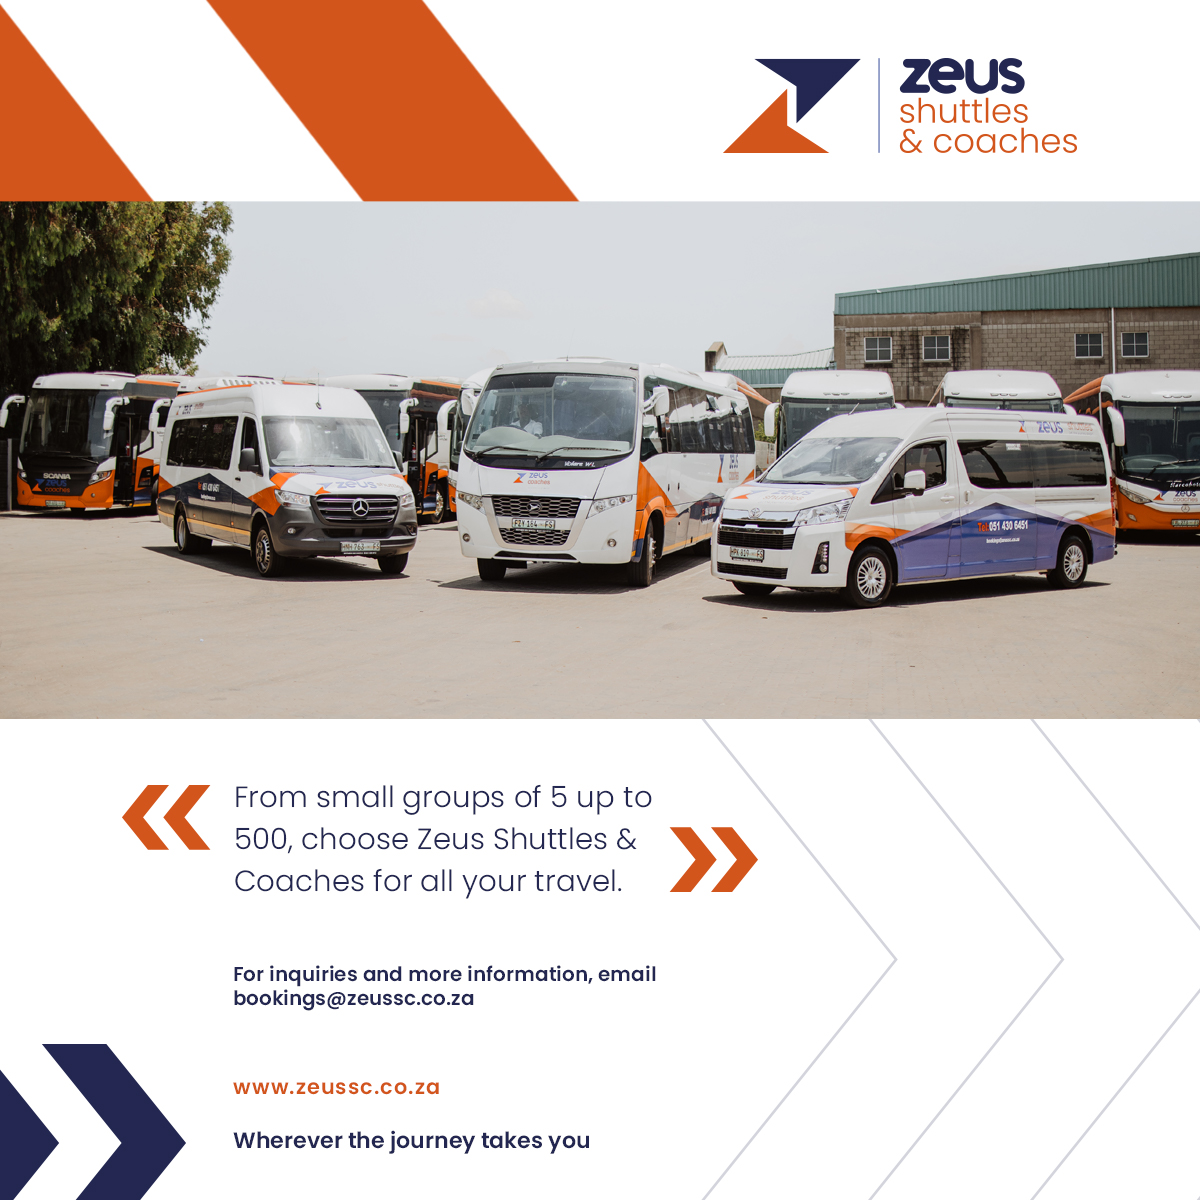 In 2023, travel in style and comfort. Choose Zeus Shuttles & Coaches for all your transportation.
For enquiries contact Bookings@zeussc.co.za

#transportation #shuttleservice #shuttlebus #travelcoach #traveling  #longdistancetravel